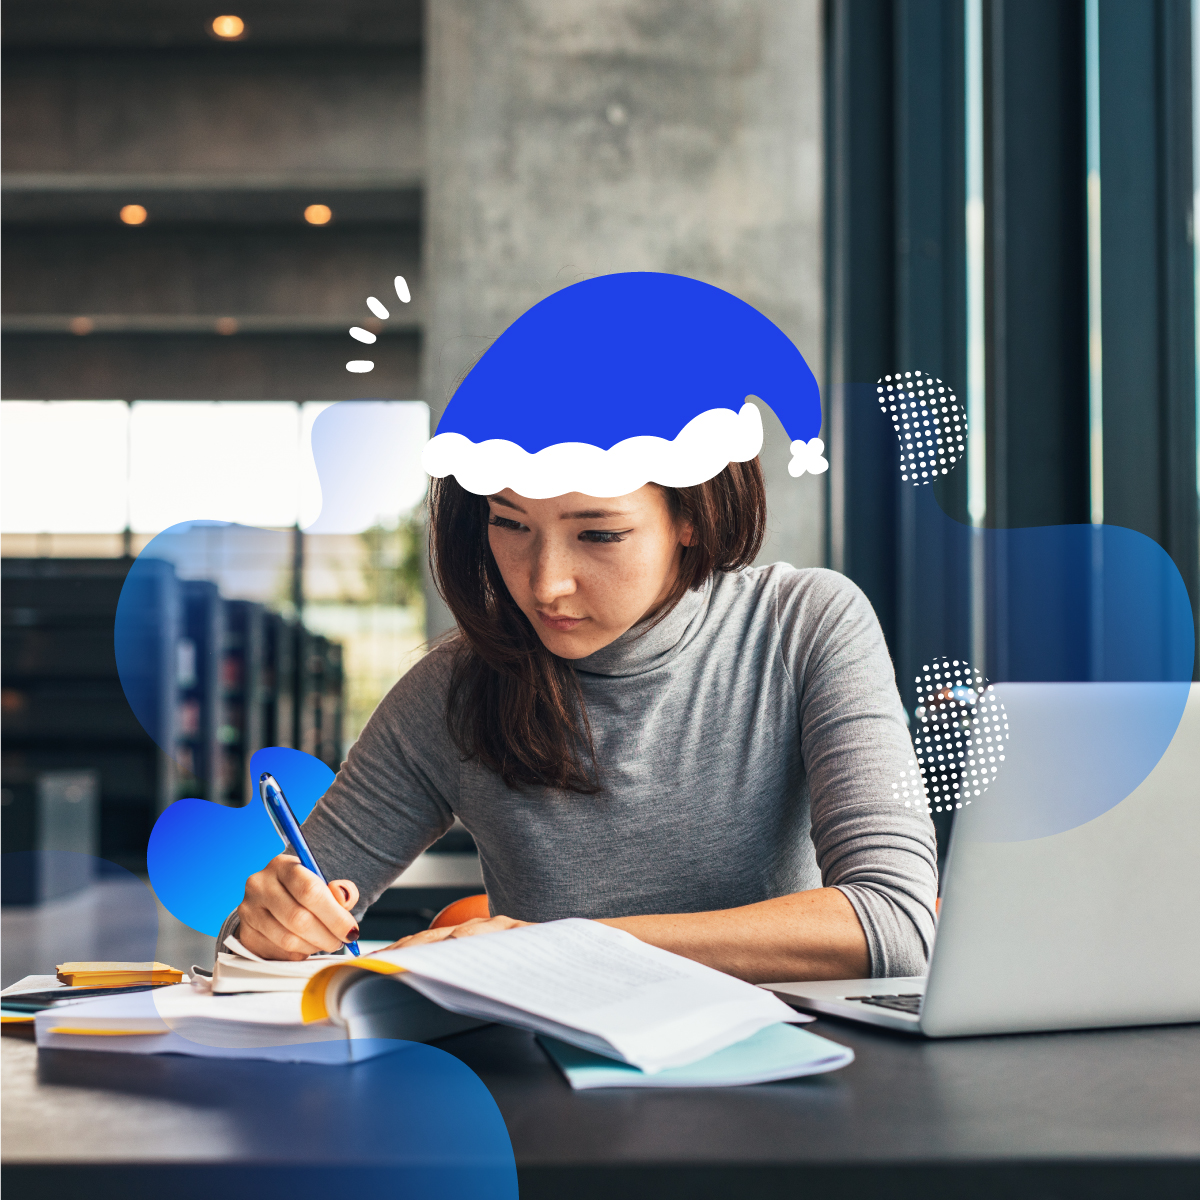 Best career advice for students during holidays